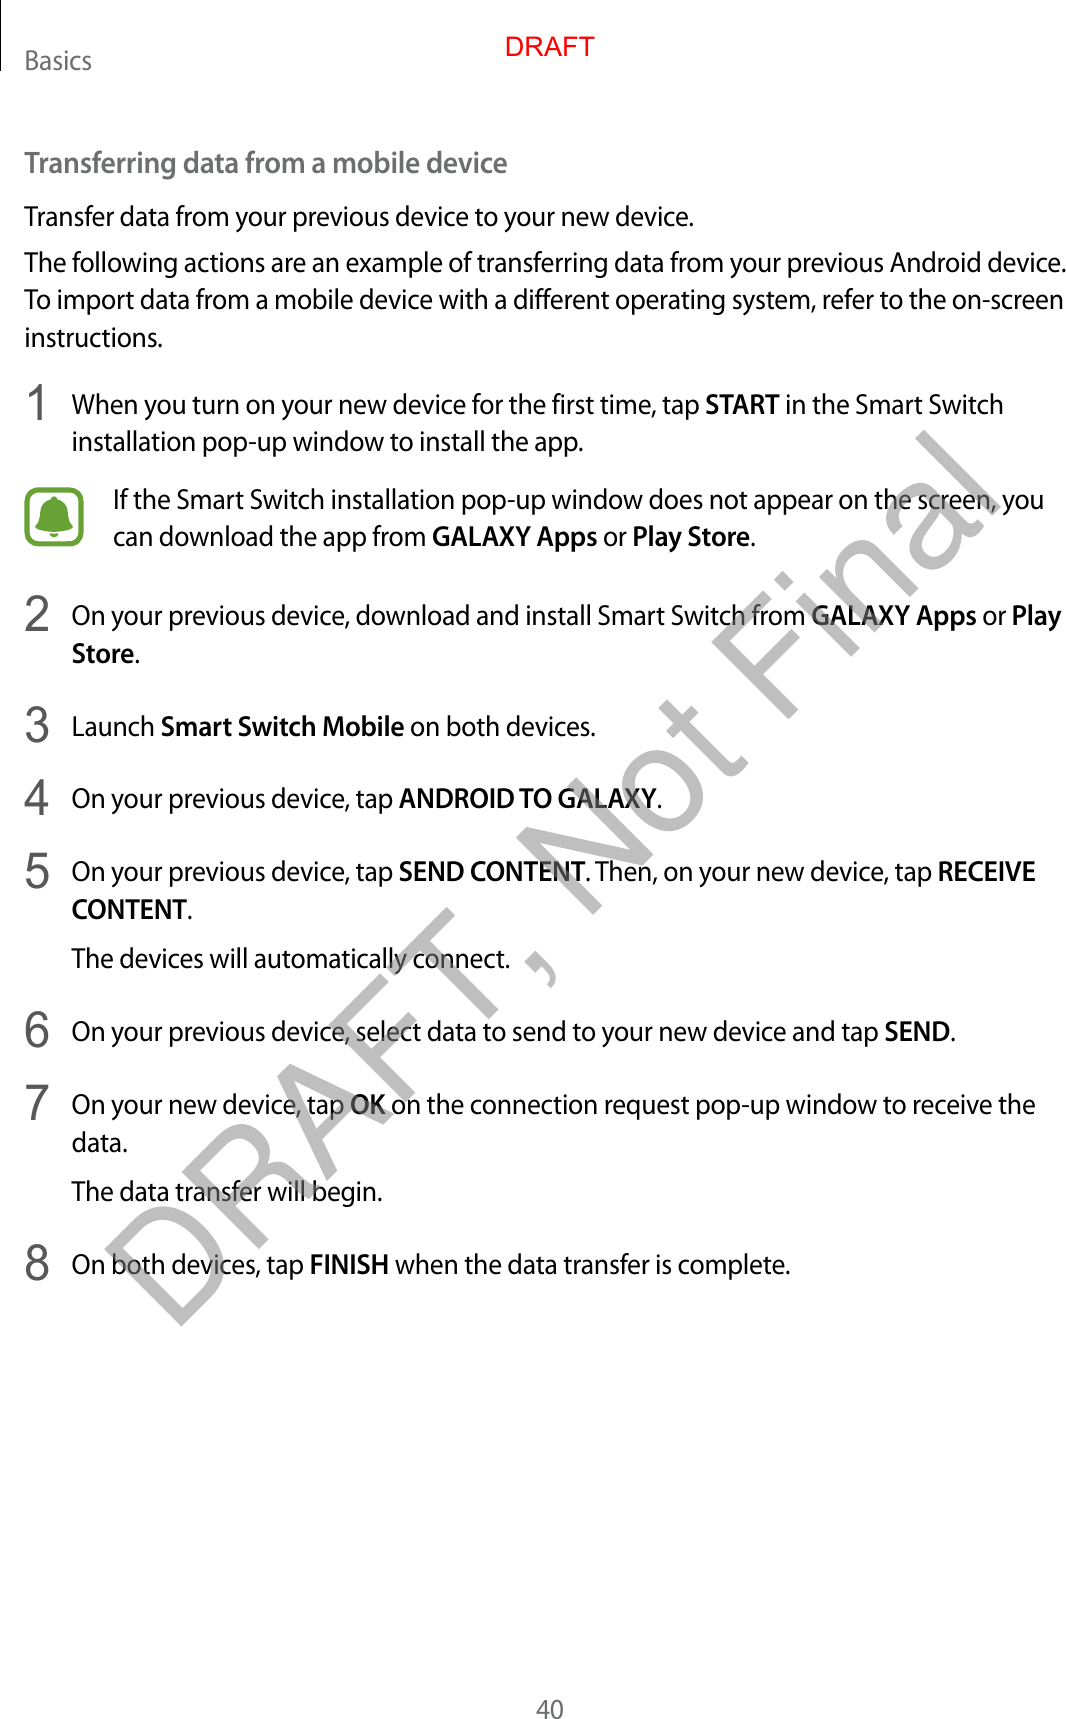 Basics40Transferring data from a mobile deviceTransfer data from your previous device to your new device.The following actions are an example of transferring data from your previous Android device. To import data from a mobile device with a different operating system, refer to the on-screen instructions.1  When you turn on your new device for the first time, tap START in the Smart Switch installation pop-up window to install the app.If the Smart Switch installation pop-up window does not appear on the screen, you can download the app from GALAXY Apps or Play Store.2  On your previous device, download and install Smart Switch from GALAXY Apps or Play Store.3  Launch Smart Switch Mobile on both devices.4  On your previous device, tap ANDROID TO GALAXY.5  On your previous device, tap SEND CONTENT. Then, on your new device, tap RECEIVE CONTENT.The devices will automatically connect.6  On your previous device, select data to send to your new device and tap SEND.7  On your new device, tap OK on the connection request pop-up window to receive the data.The data transfer will begin.8  On both devices, tap FINISH when the data transfer is complete.DRAFTDRAFT, Not Final